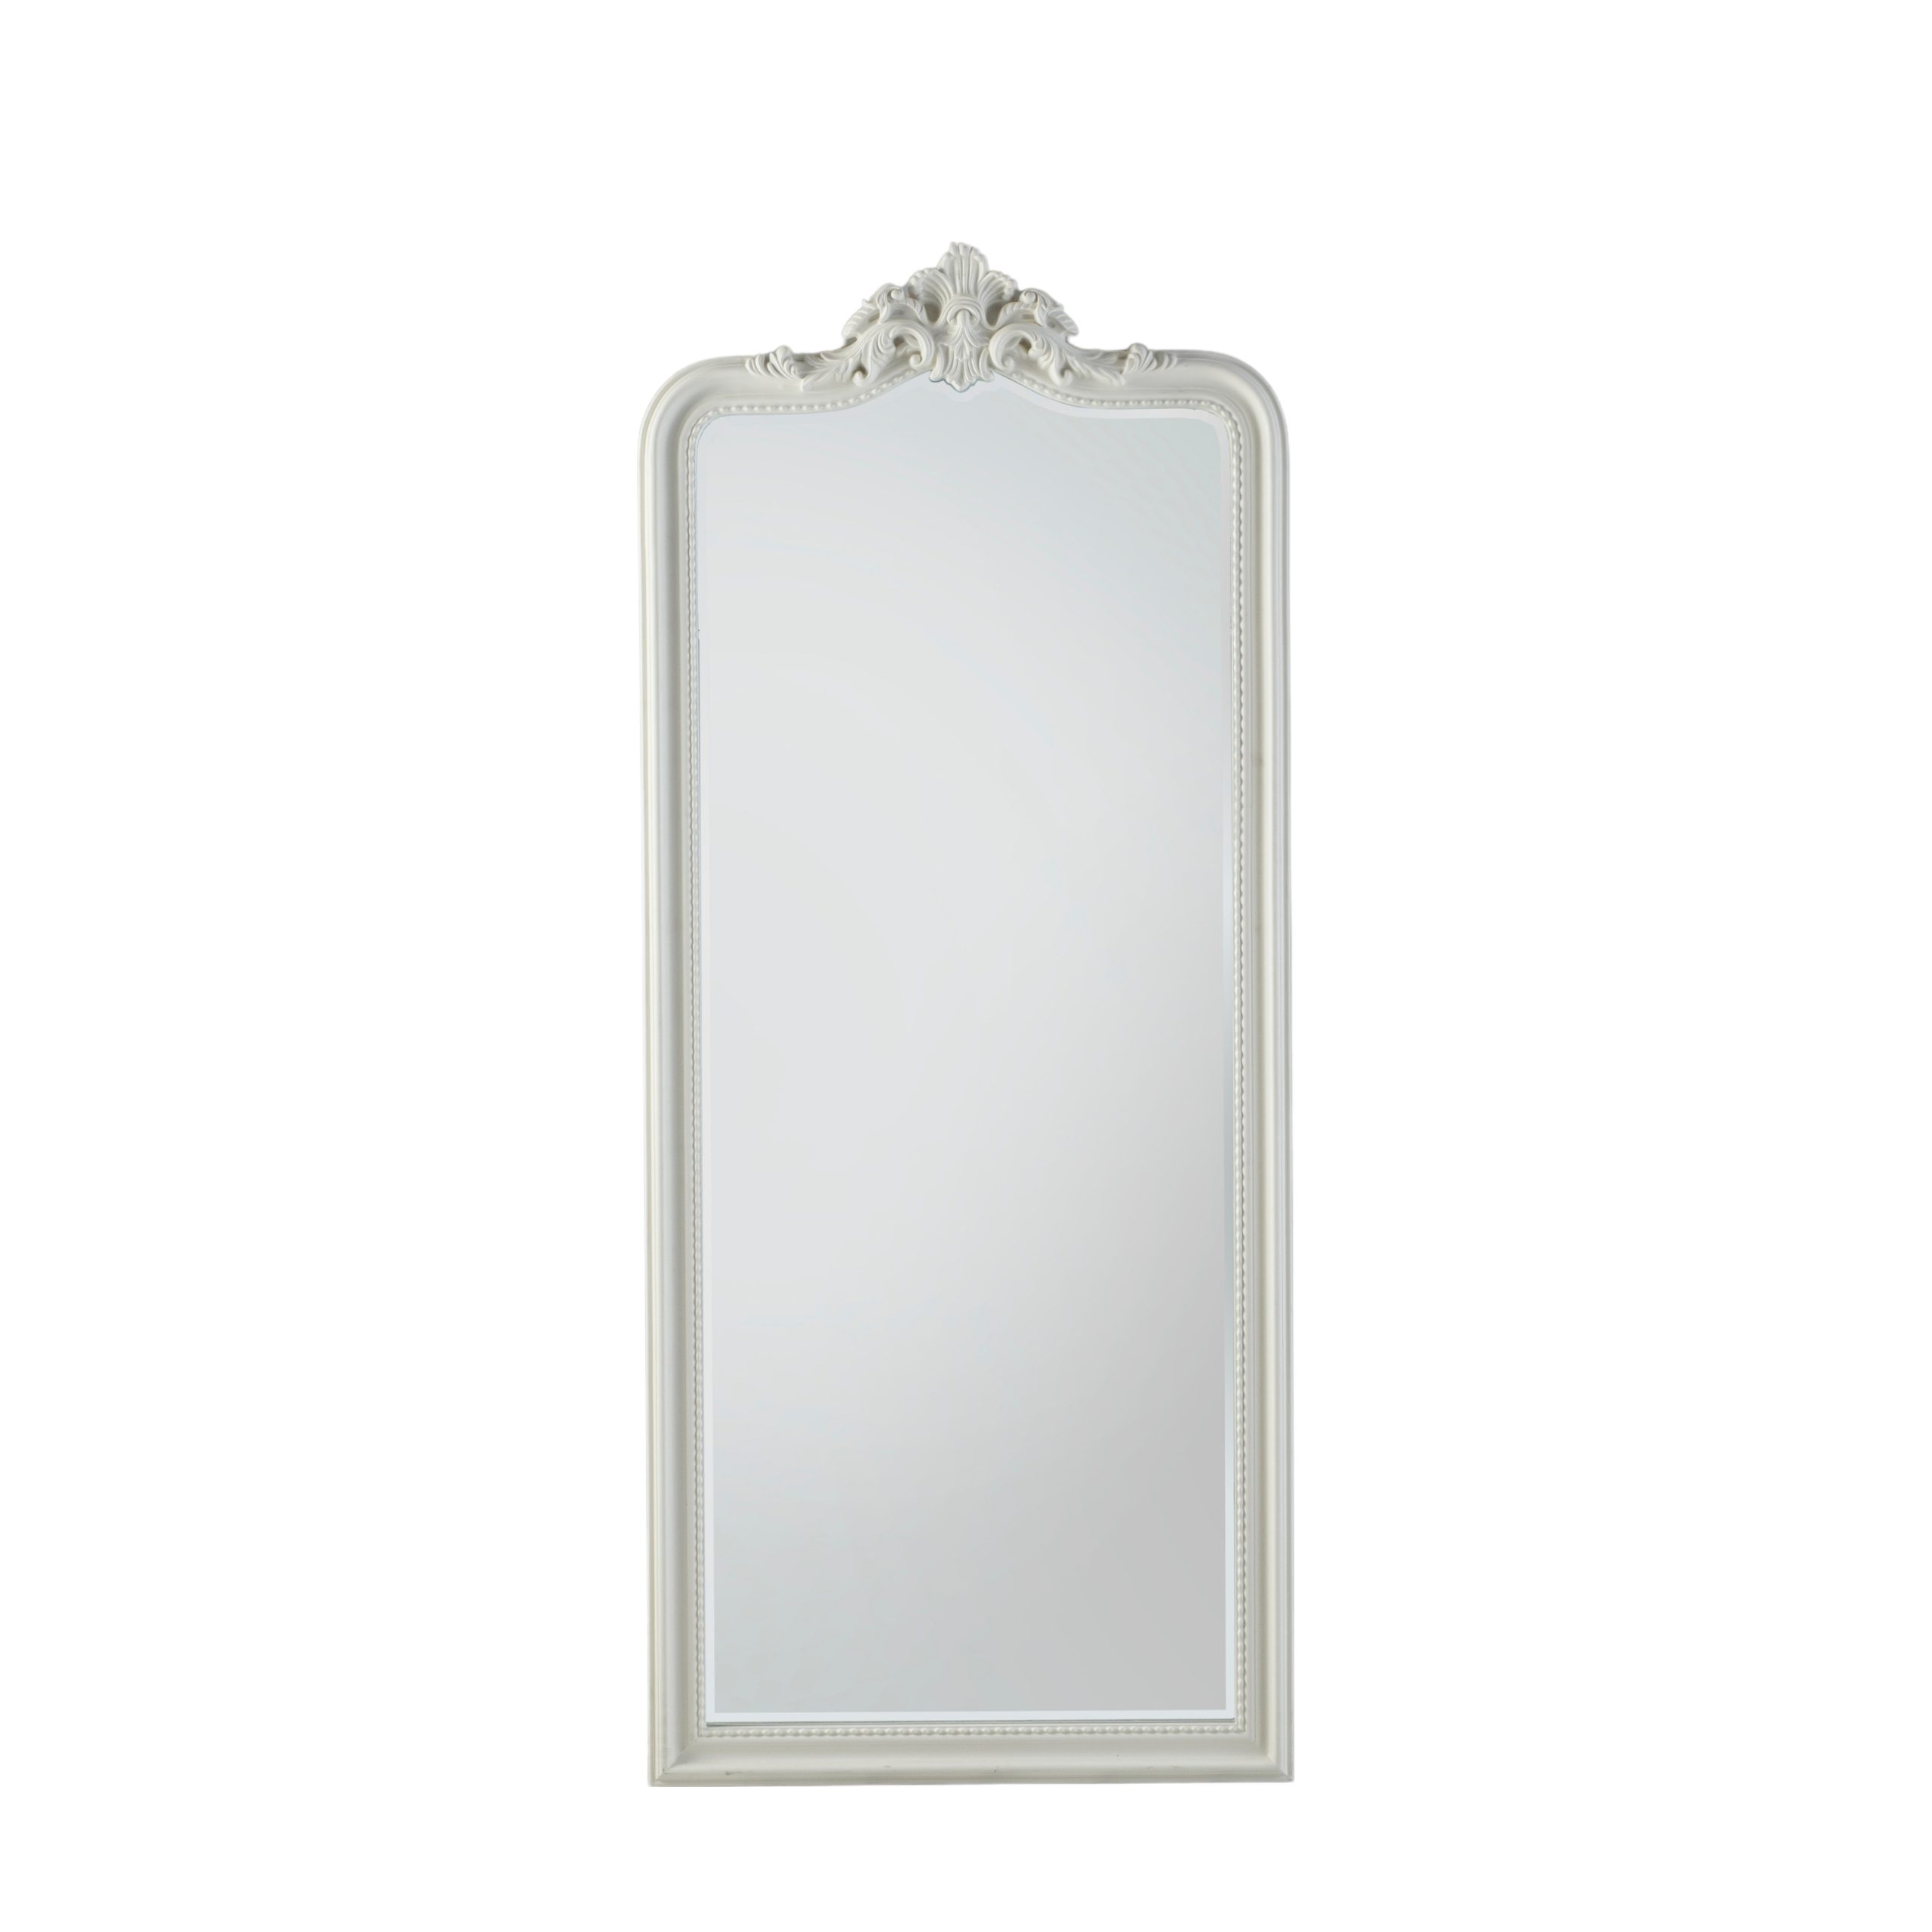 Gallery Direct Cagney Mirror White